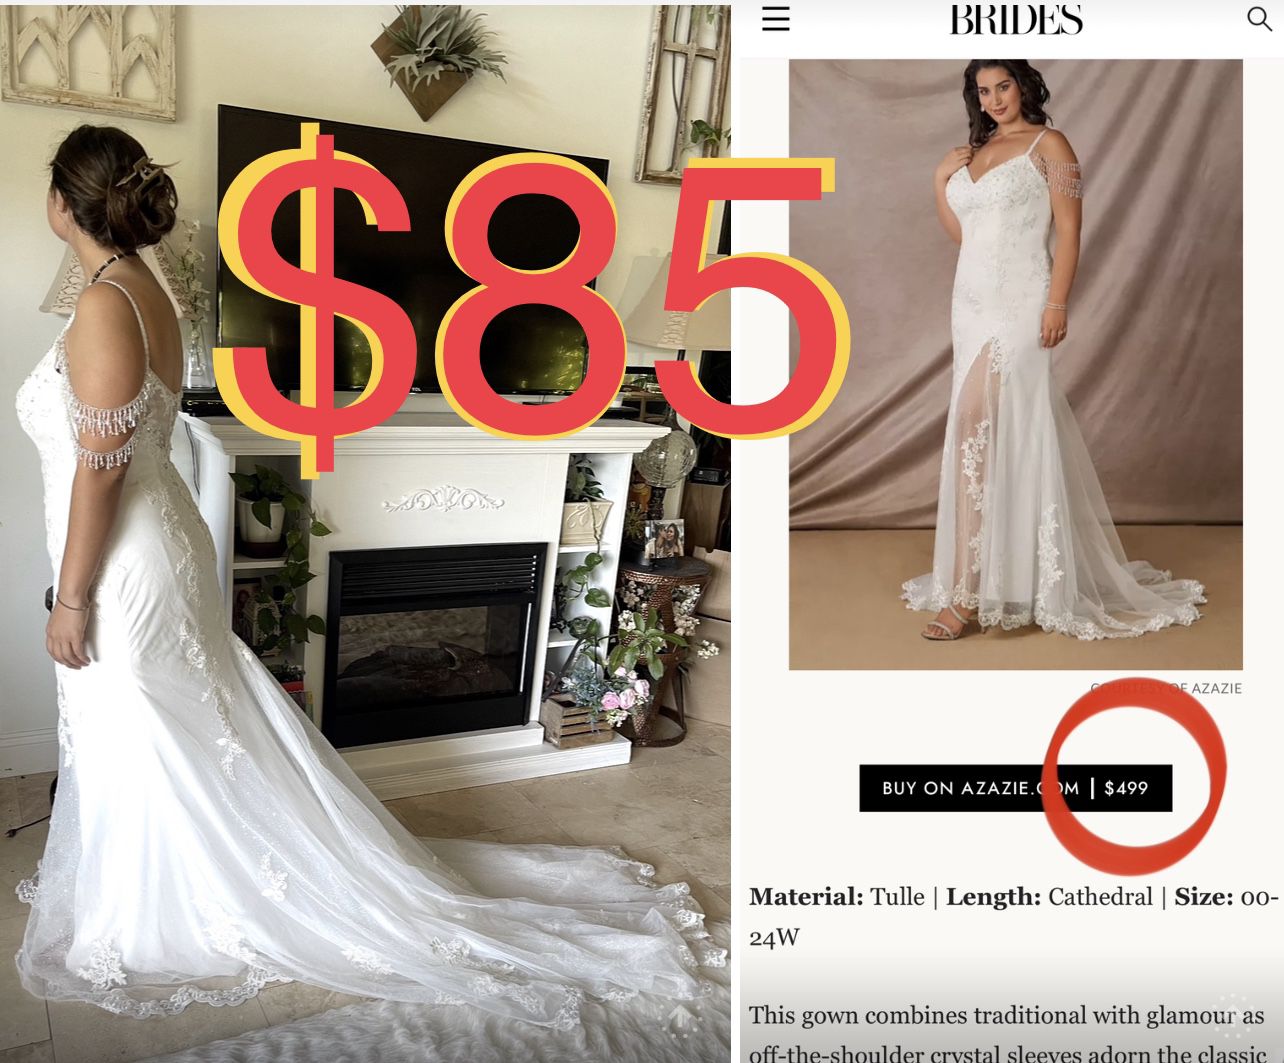 $85 Stunning Weddings Gown/Dress in Great condition size Large. only need dry clean